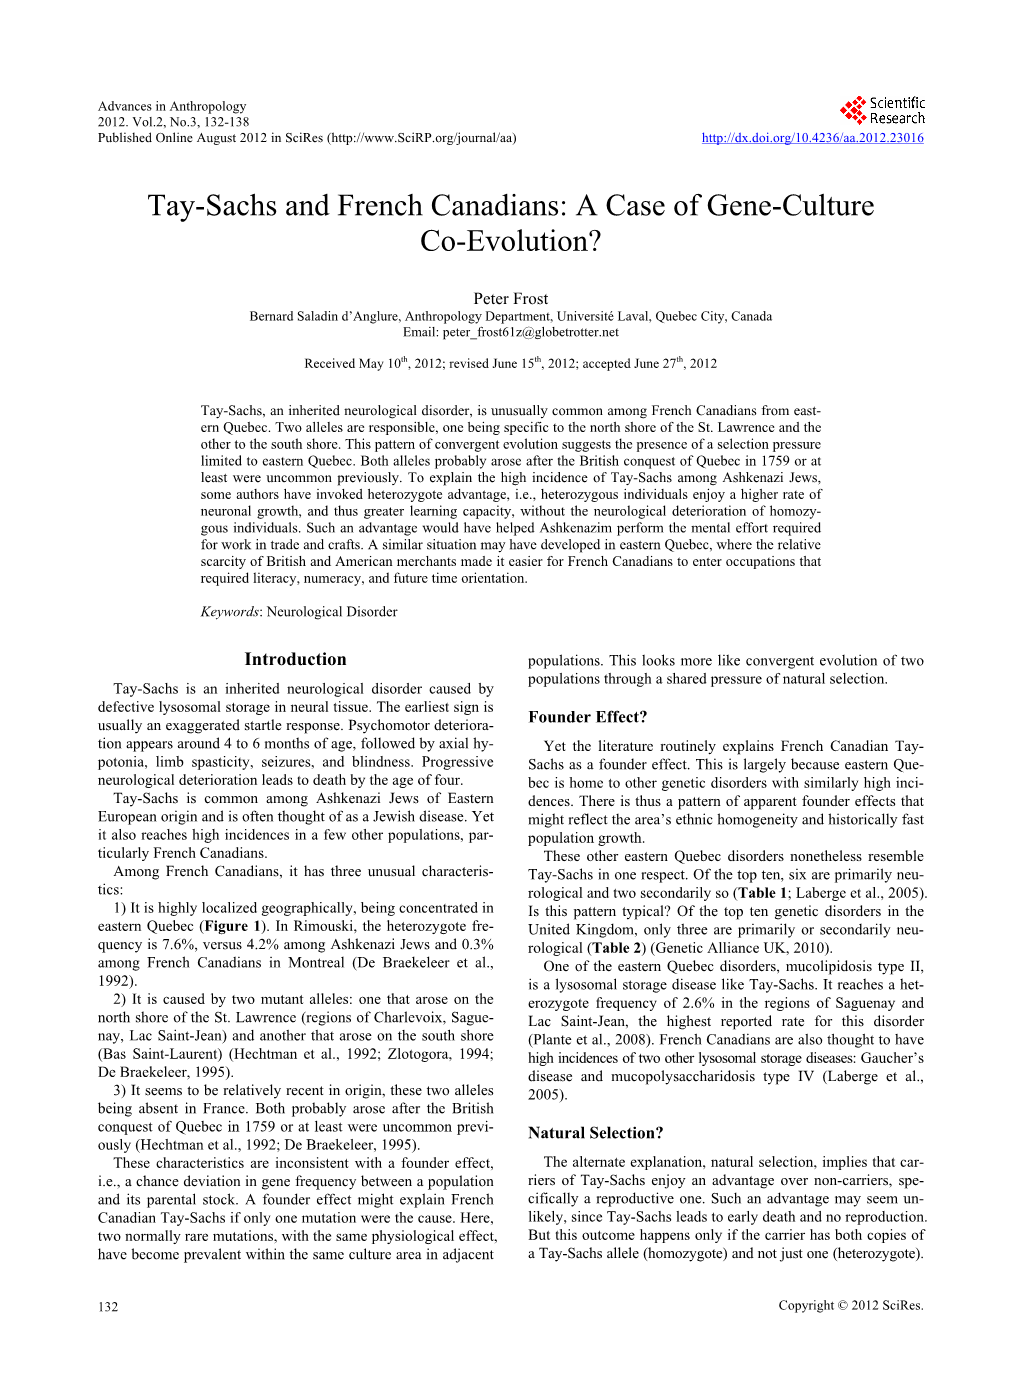 Tay-Sachs and French Canadians: a Case of Gene-Culture Co-Evolution?